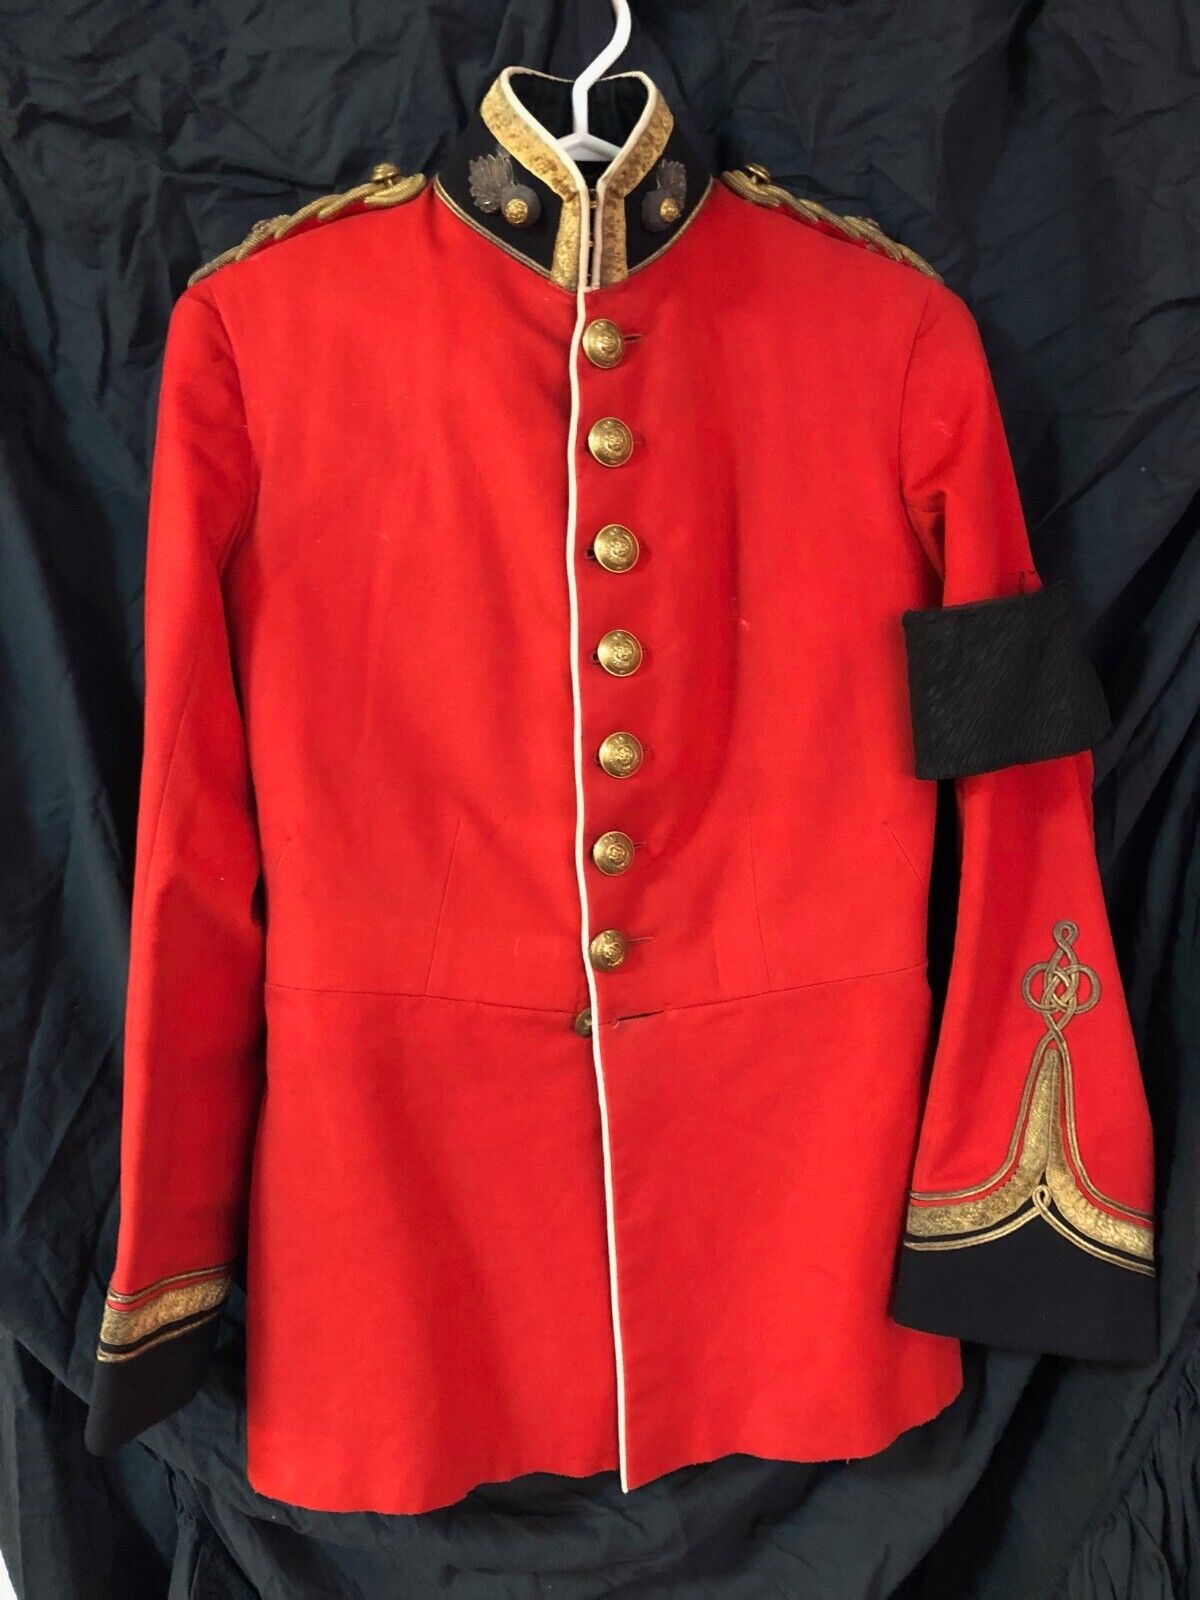 Pre WW1 Edwardian British Officer's Dress tunic - Royal Fusiliers City of London